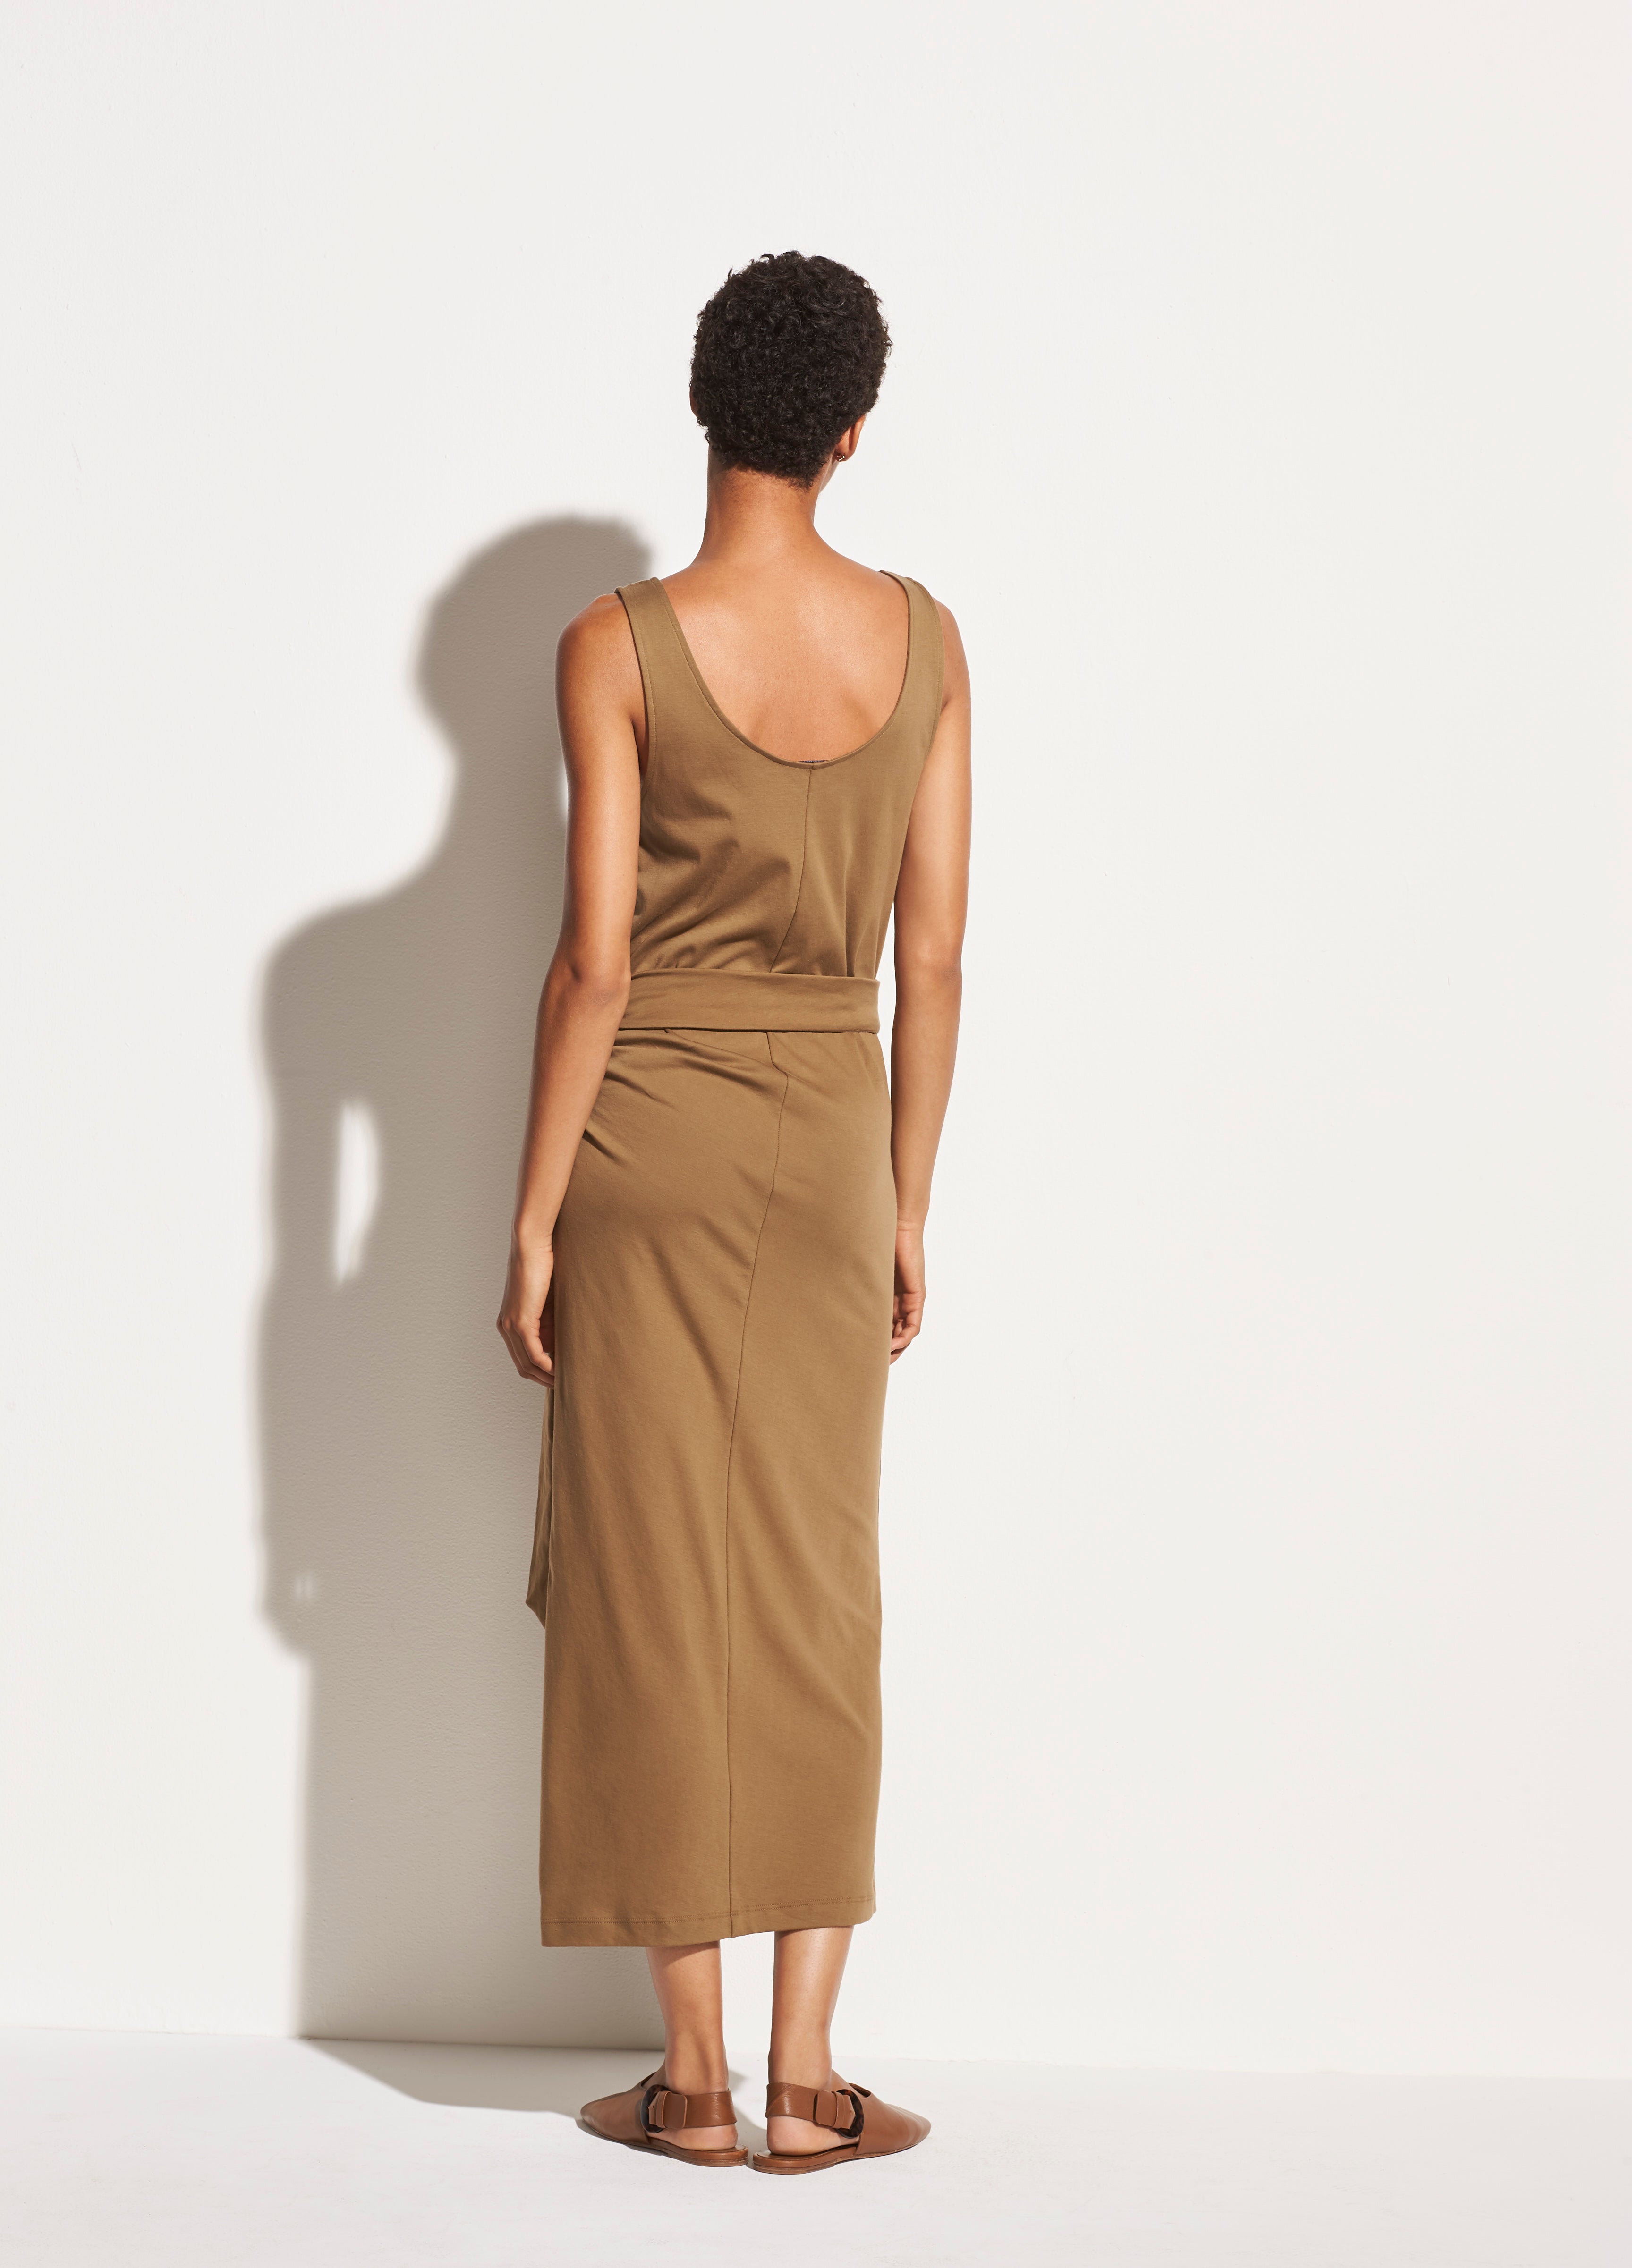 Vince | Sleeveless Wrap Dress in Timber | Vince Unfold